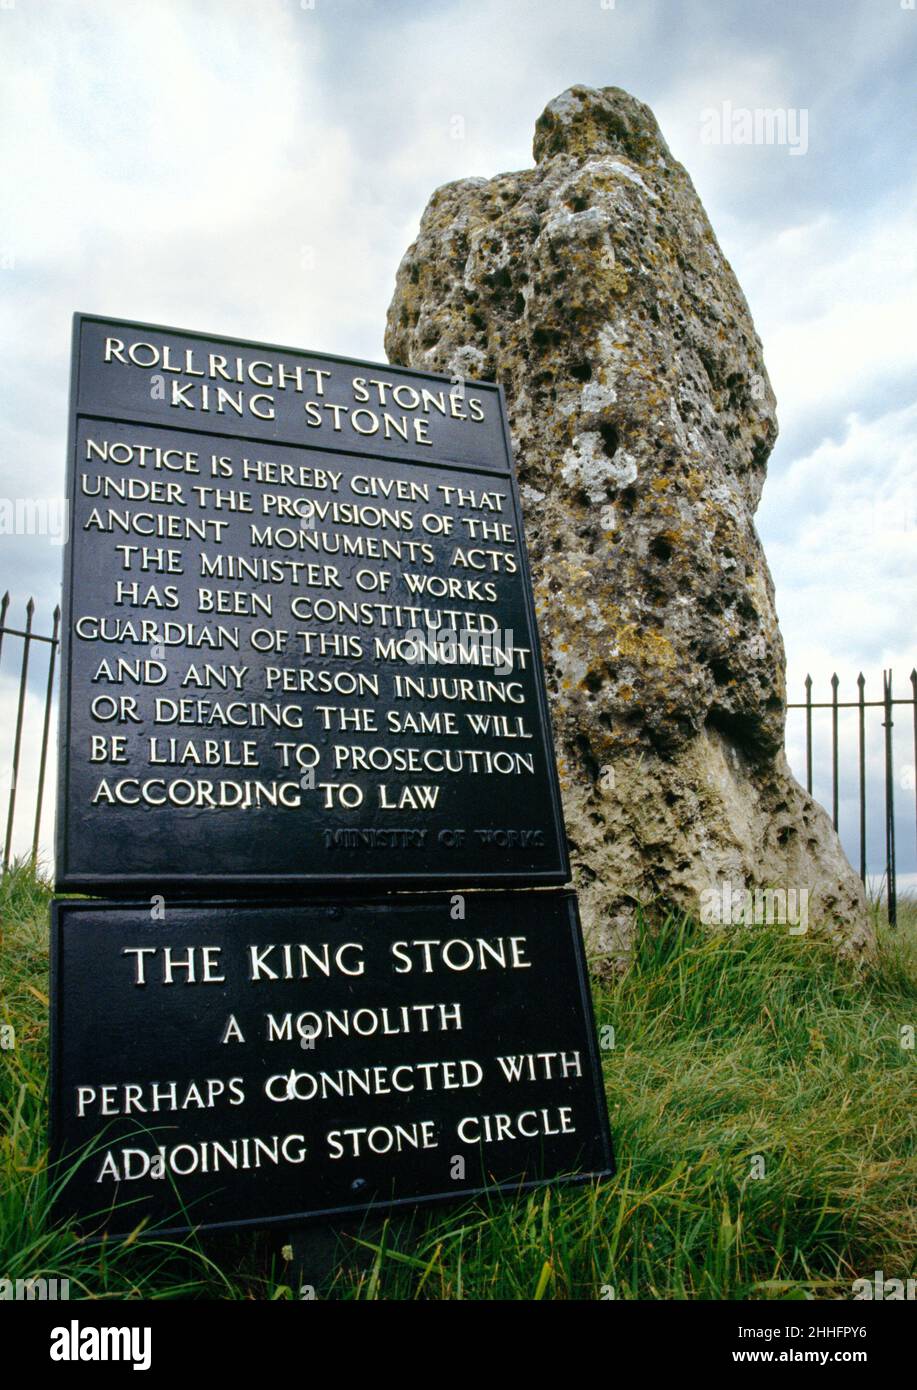 King Stone Standing Stone, Little Rollright, Warwickshire. Prehistoric monolith close to Rollright Stone Circle.    (just N of road/Oxfordshire border Stock Photo